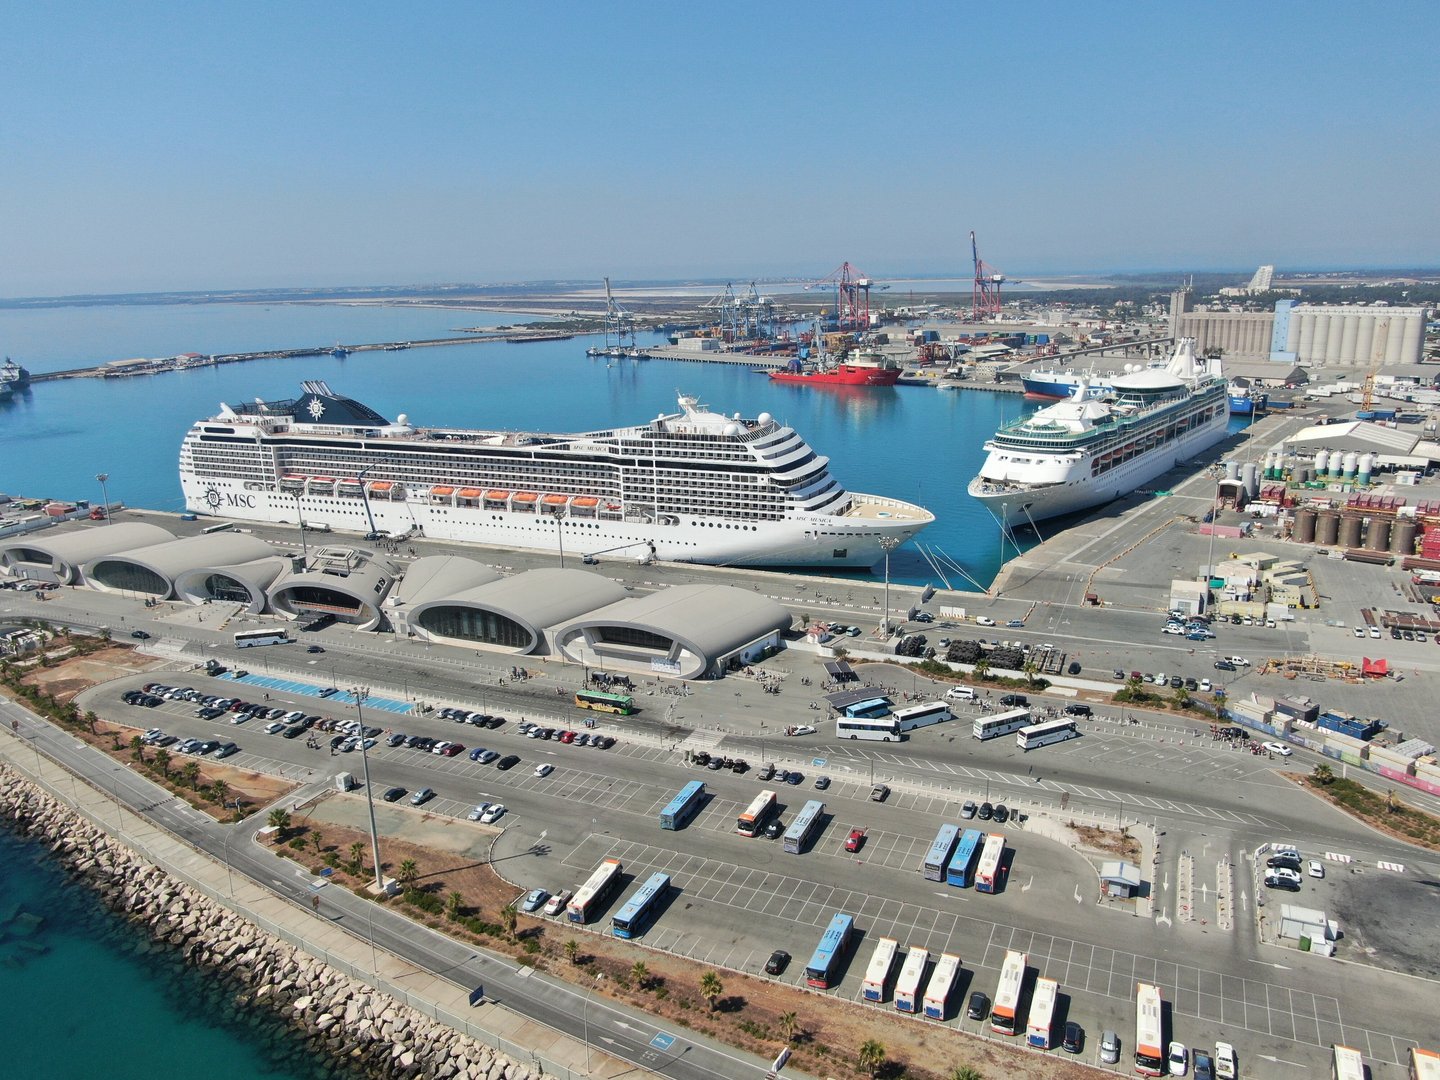 image Limassol port sees record cruise visits in October — global mix of passengers welcomed